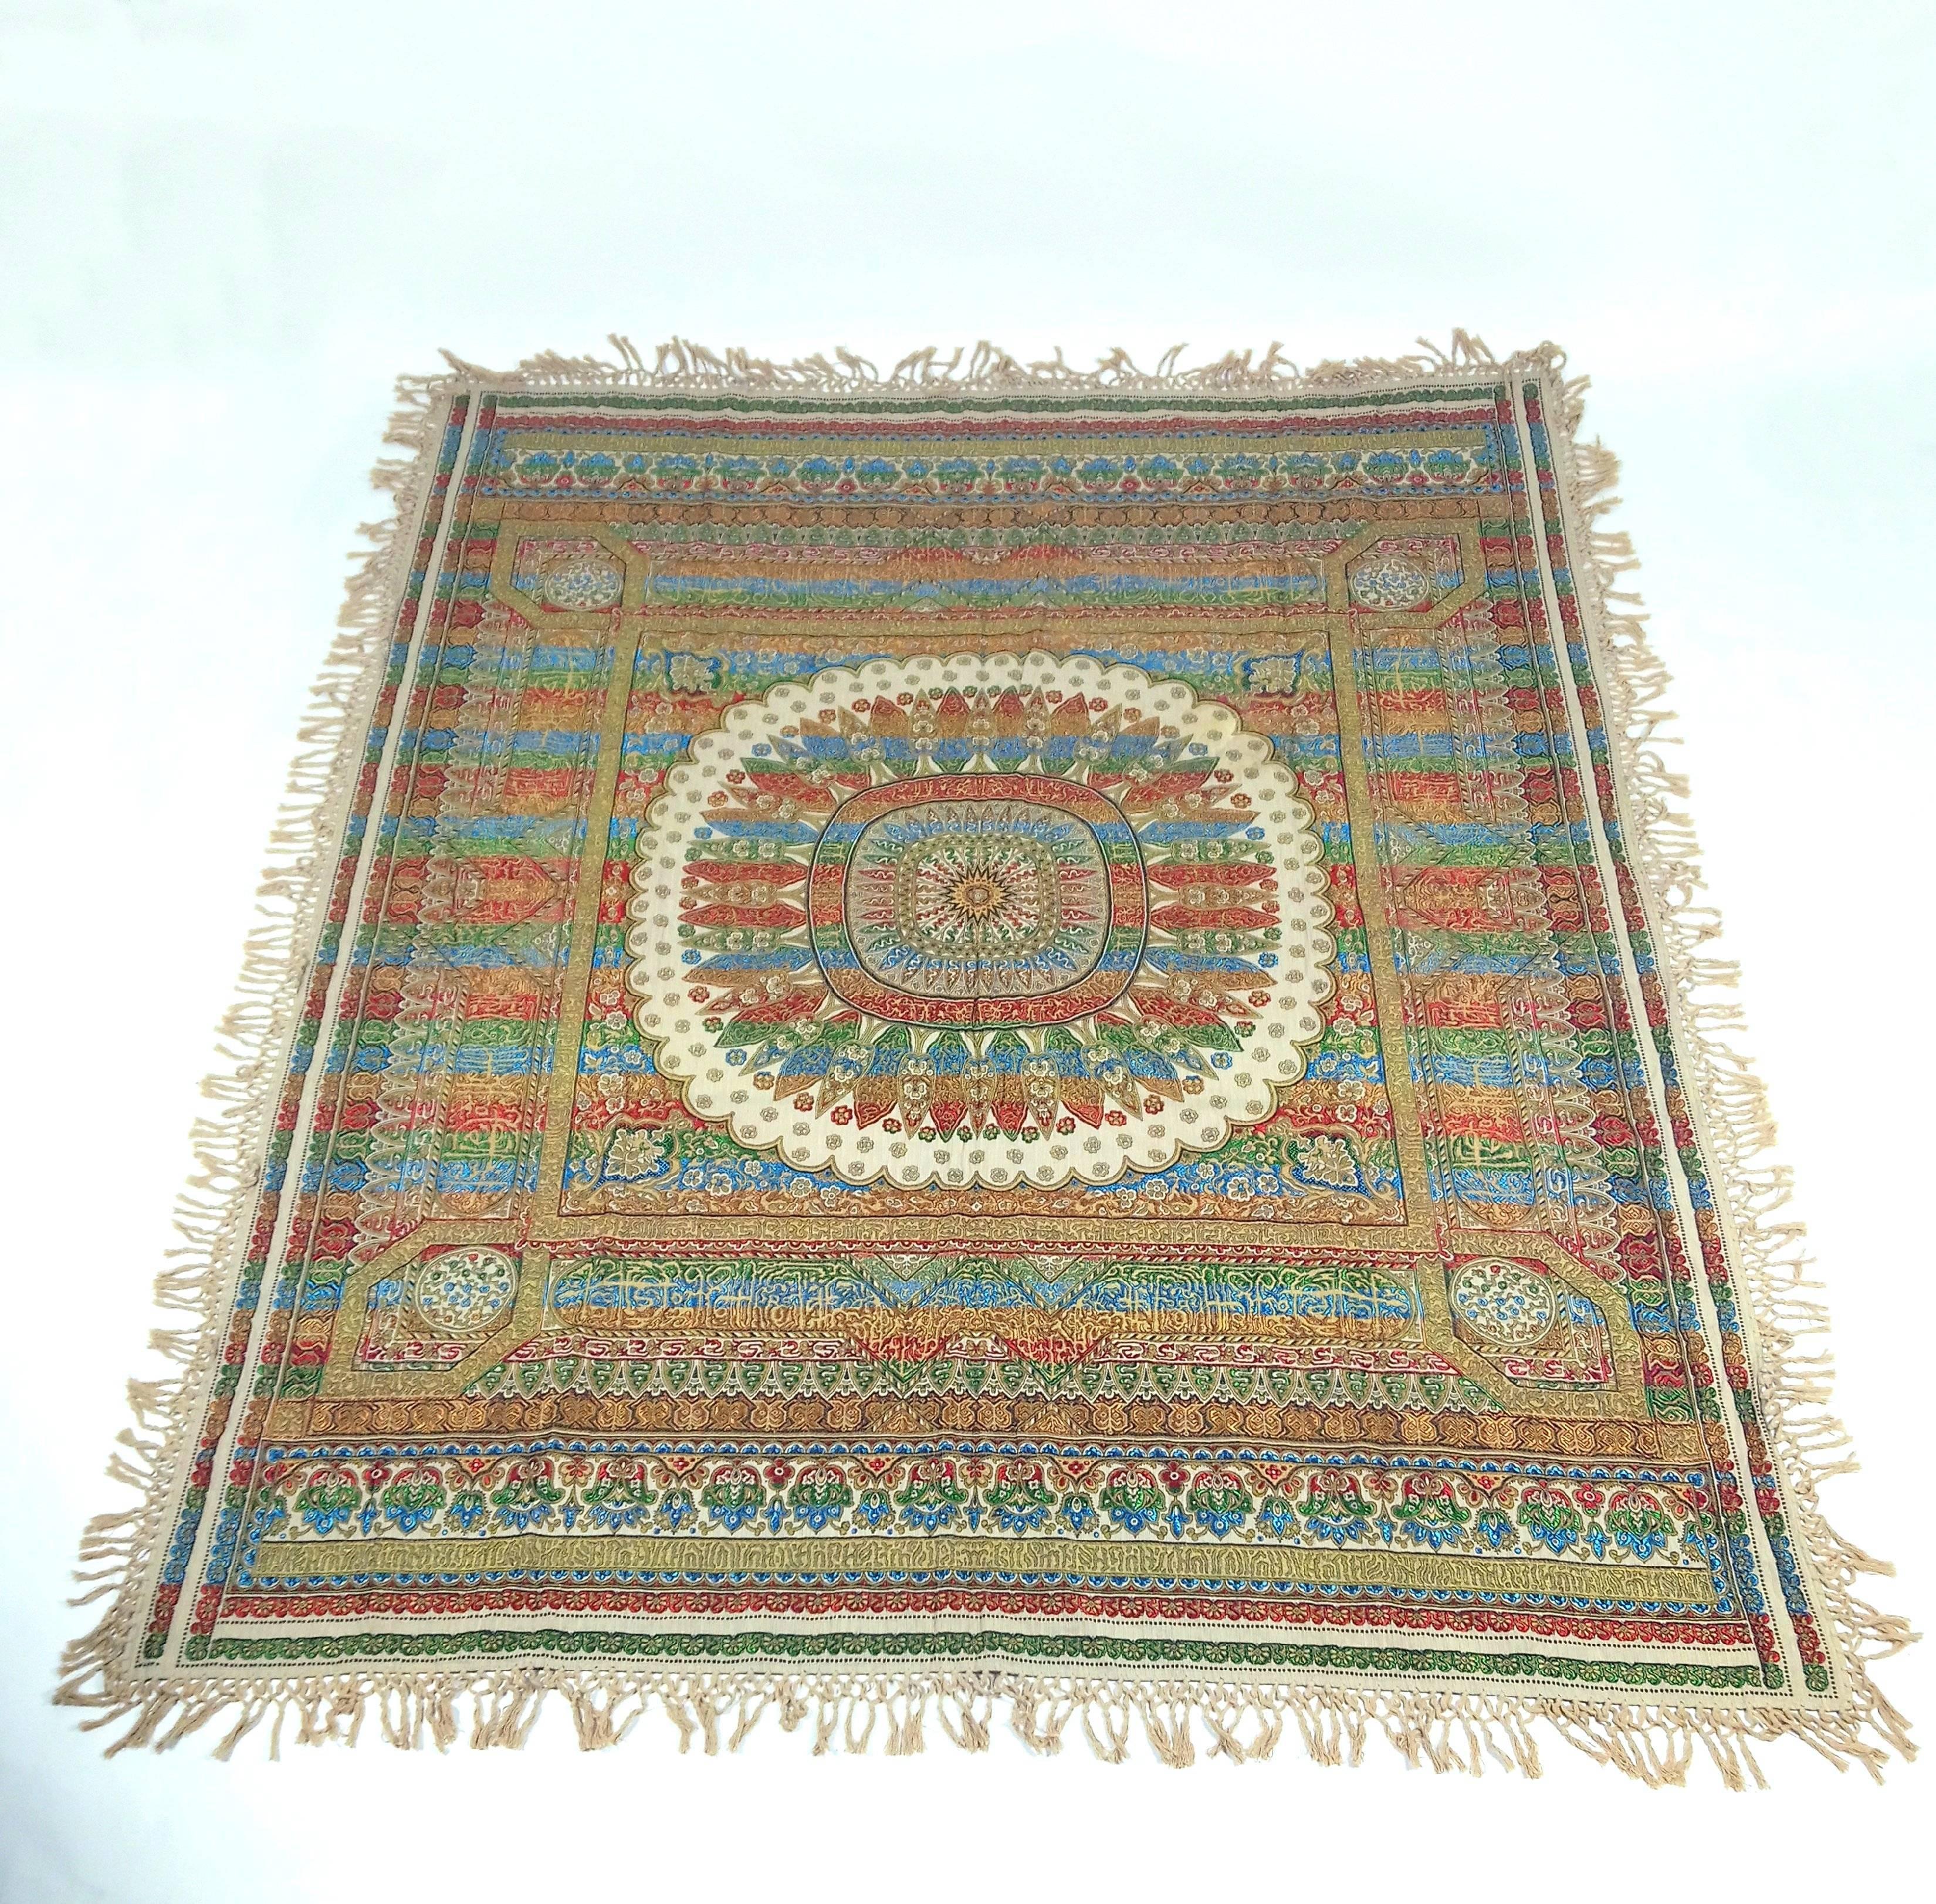 Early 20th Century Indian Worked Silk Wall Hanging or Bed Cover For Sale 6